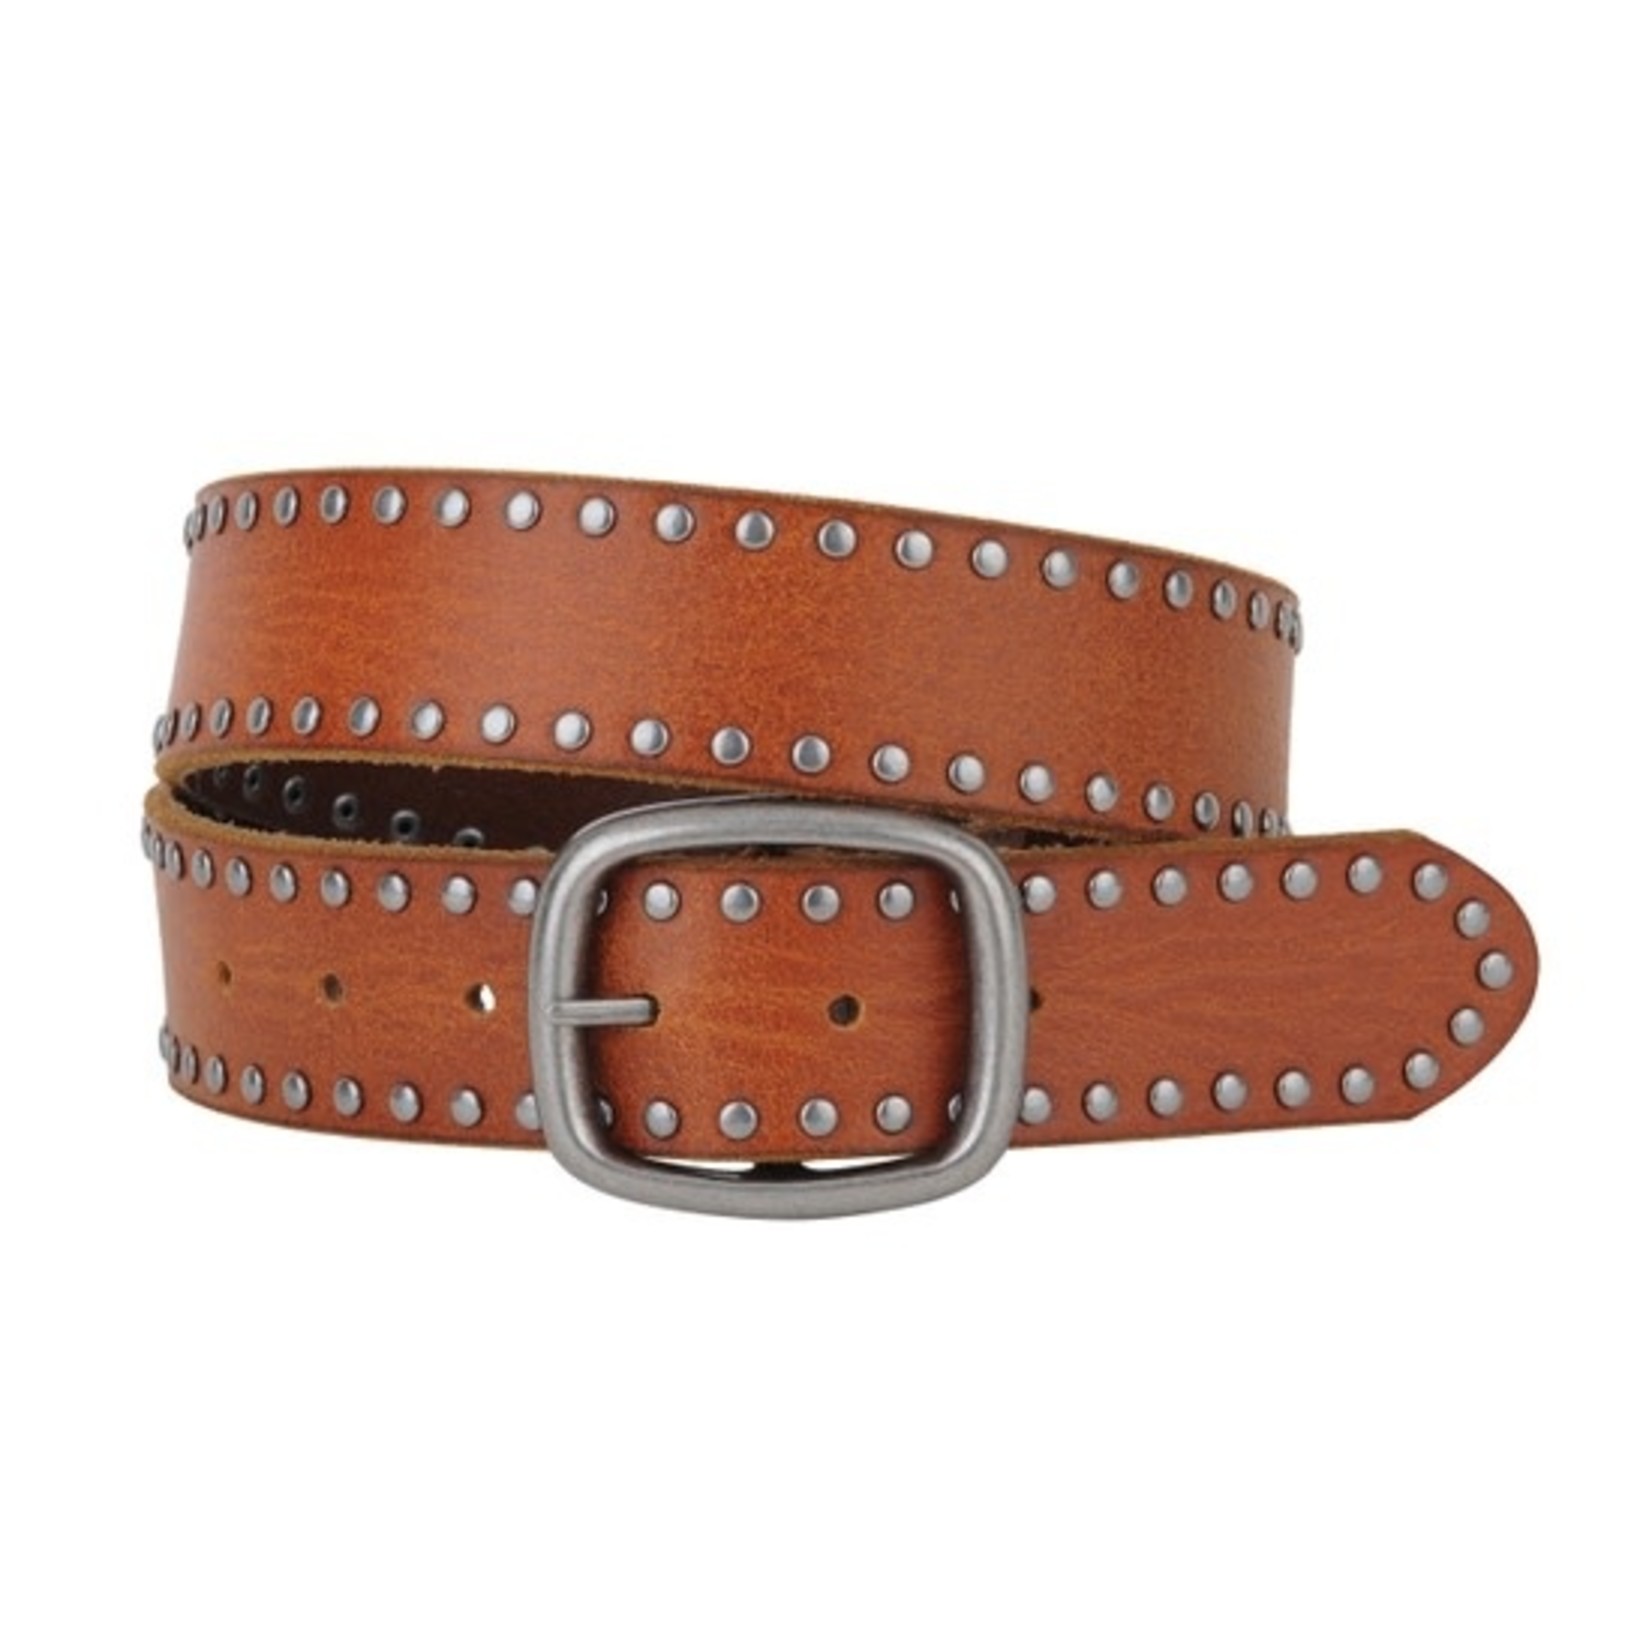 Most Wanted Grunge Stud Leather Belt